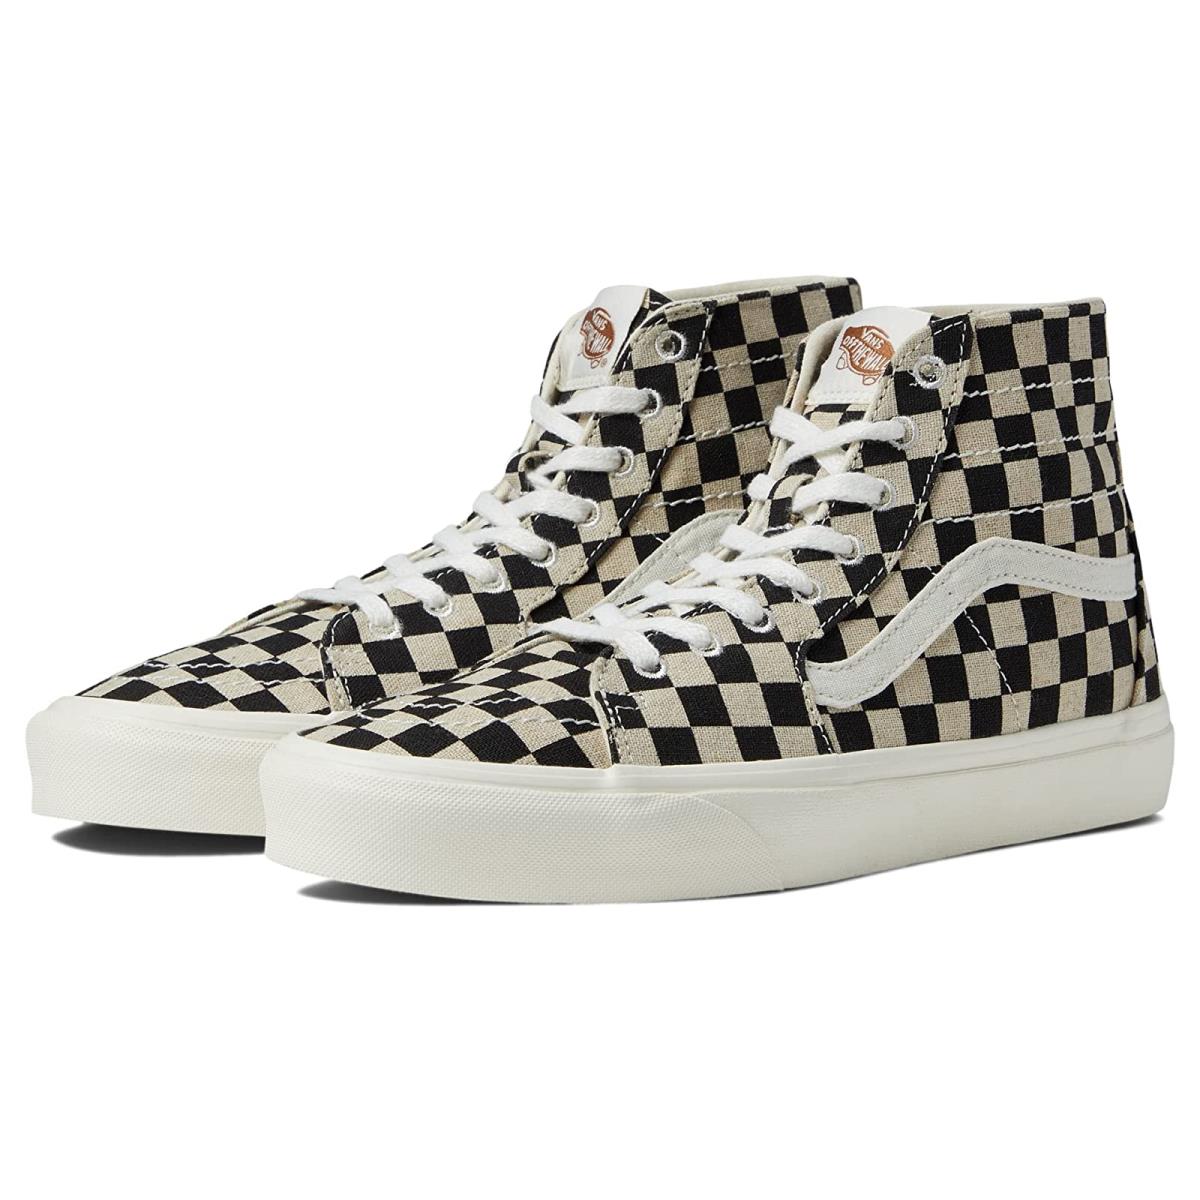 Unisex Sneakers Athletic Shoes Vans Sk8-Hi Tapered Eco Theory Checkerboard